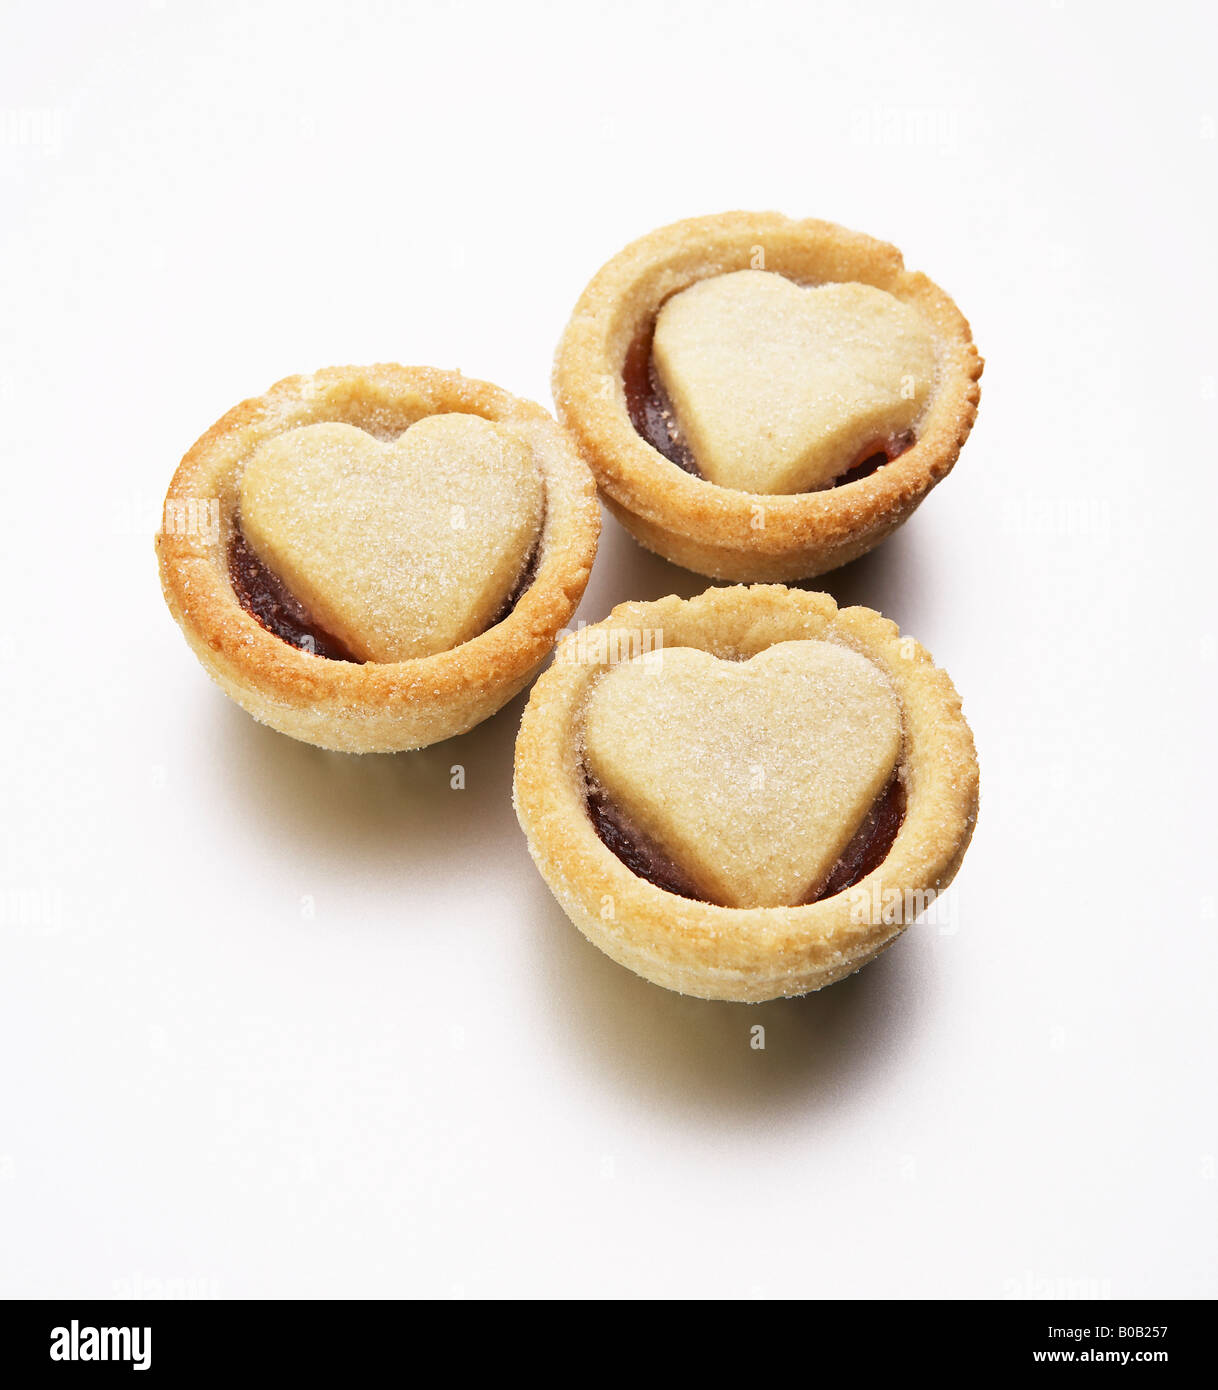 jam tarts with heart shaped pastry lids Stock Photo